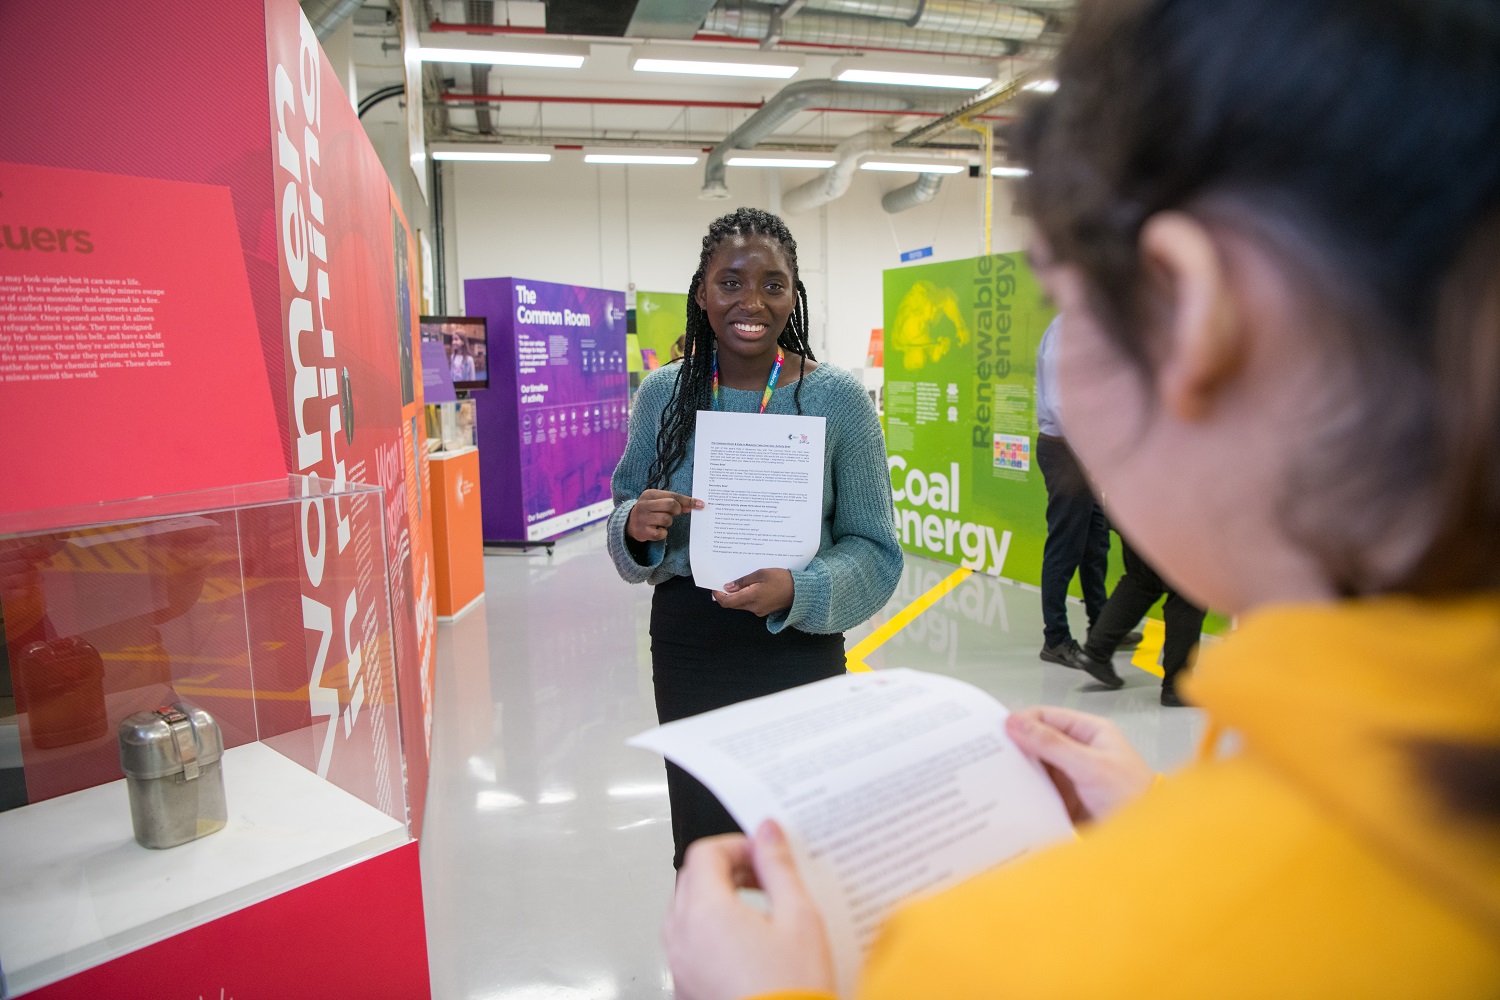 A young woman smiles and stands in front of another holding an A4 sheet of paper in an exhibition at the Common Room and Caterpillar Takeover Day.